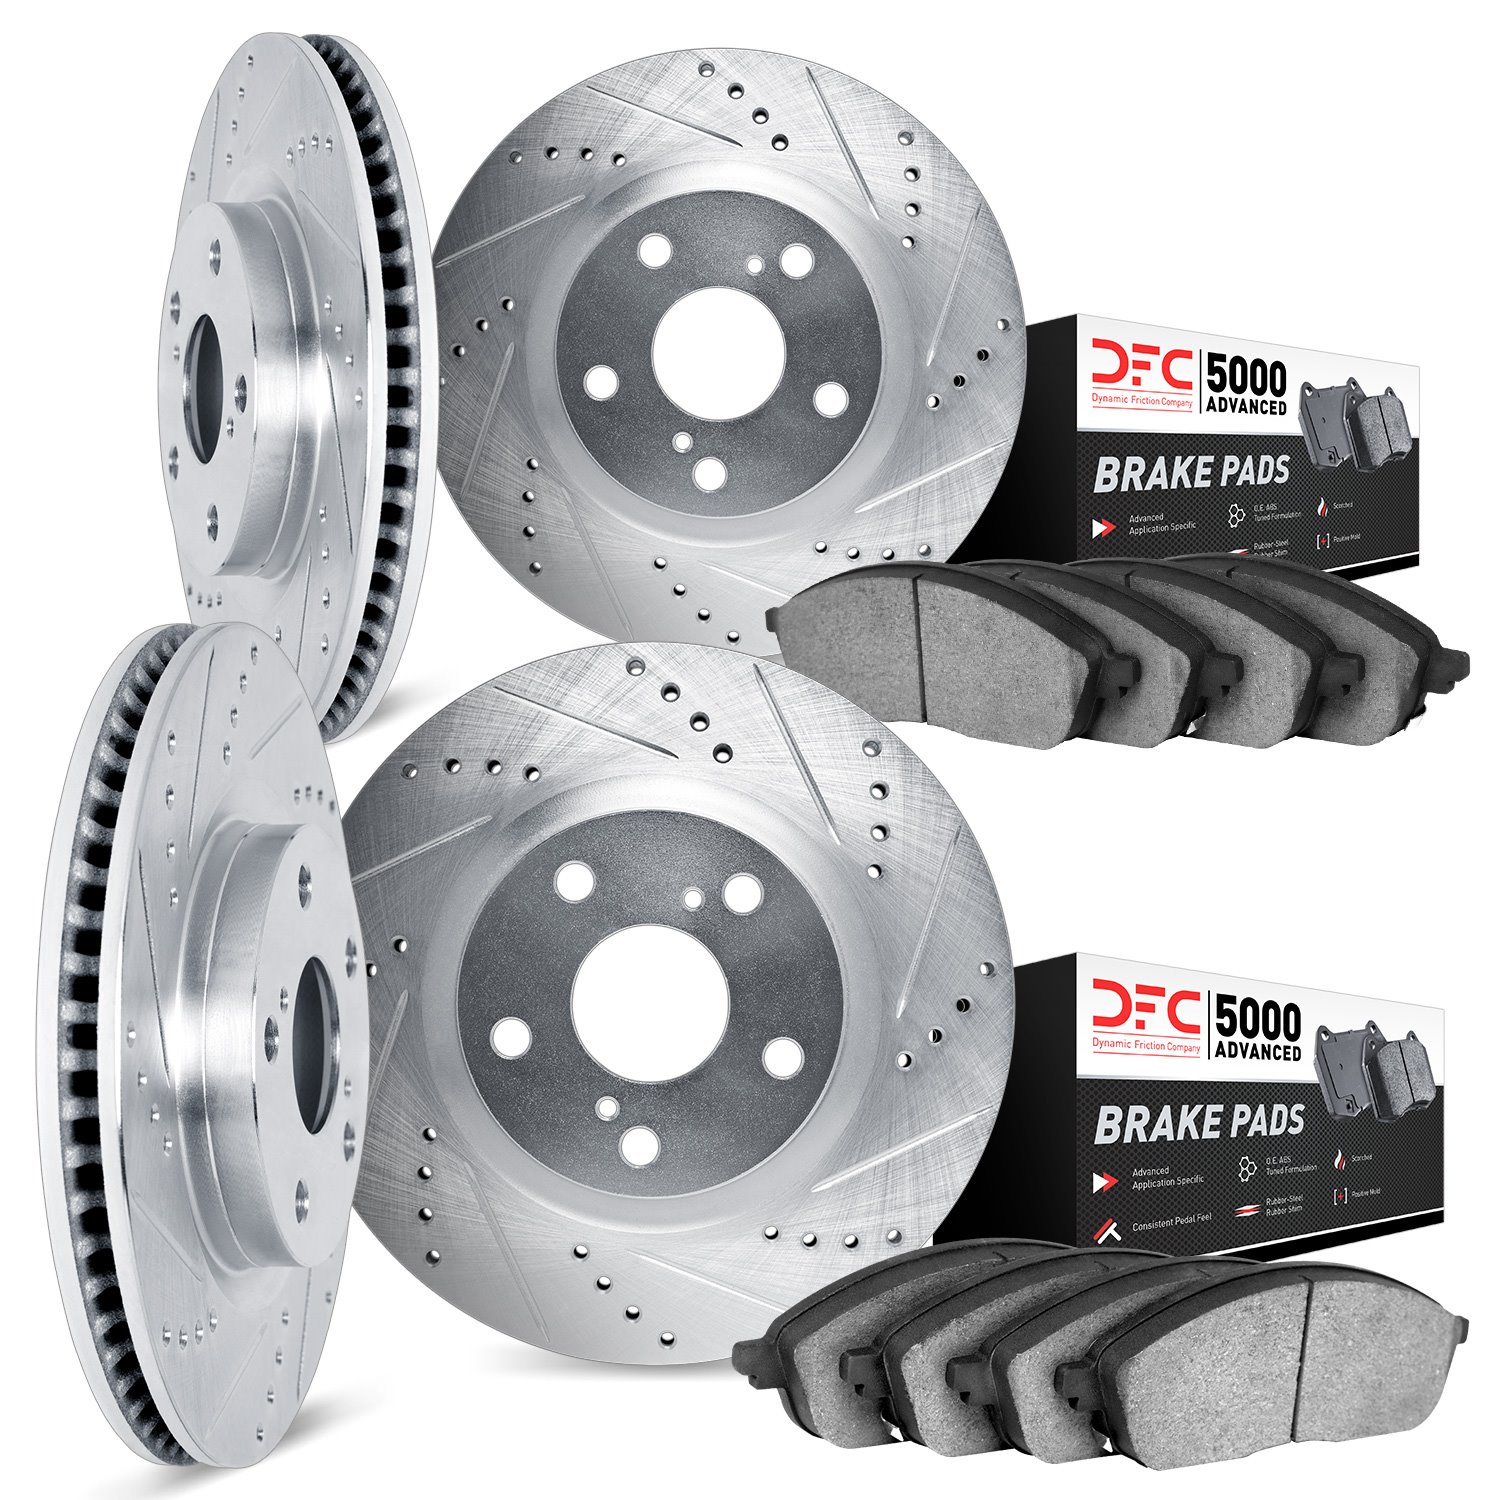 7504-02008 Drilled/Slotted Brake Rotors w/5000 Advanced Brake Pads Kit [Silver], 1986-1986 Porsche, Position: Front and Rear